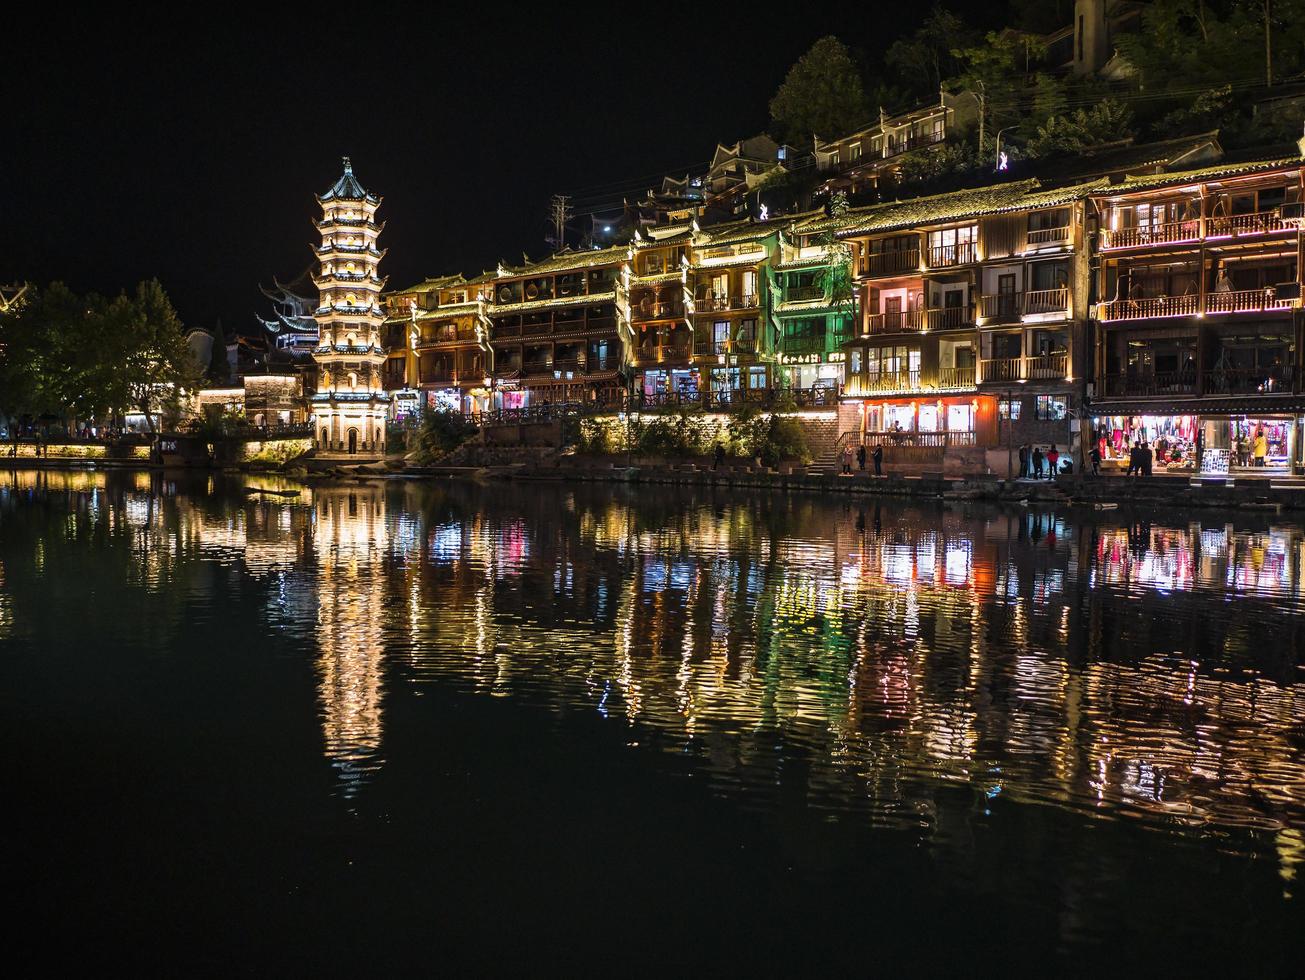 Scenery view in the night of fenghuang old town .phoenix ancient town or Fenghuang County is a county of Hunan Province, China photo